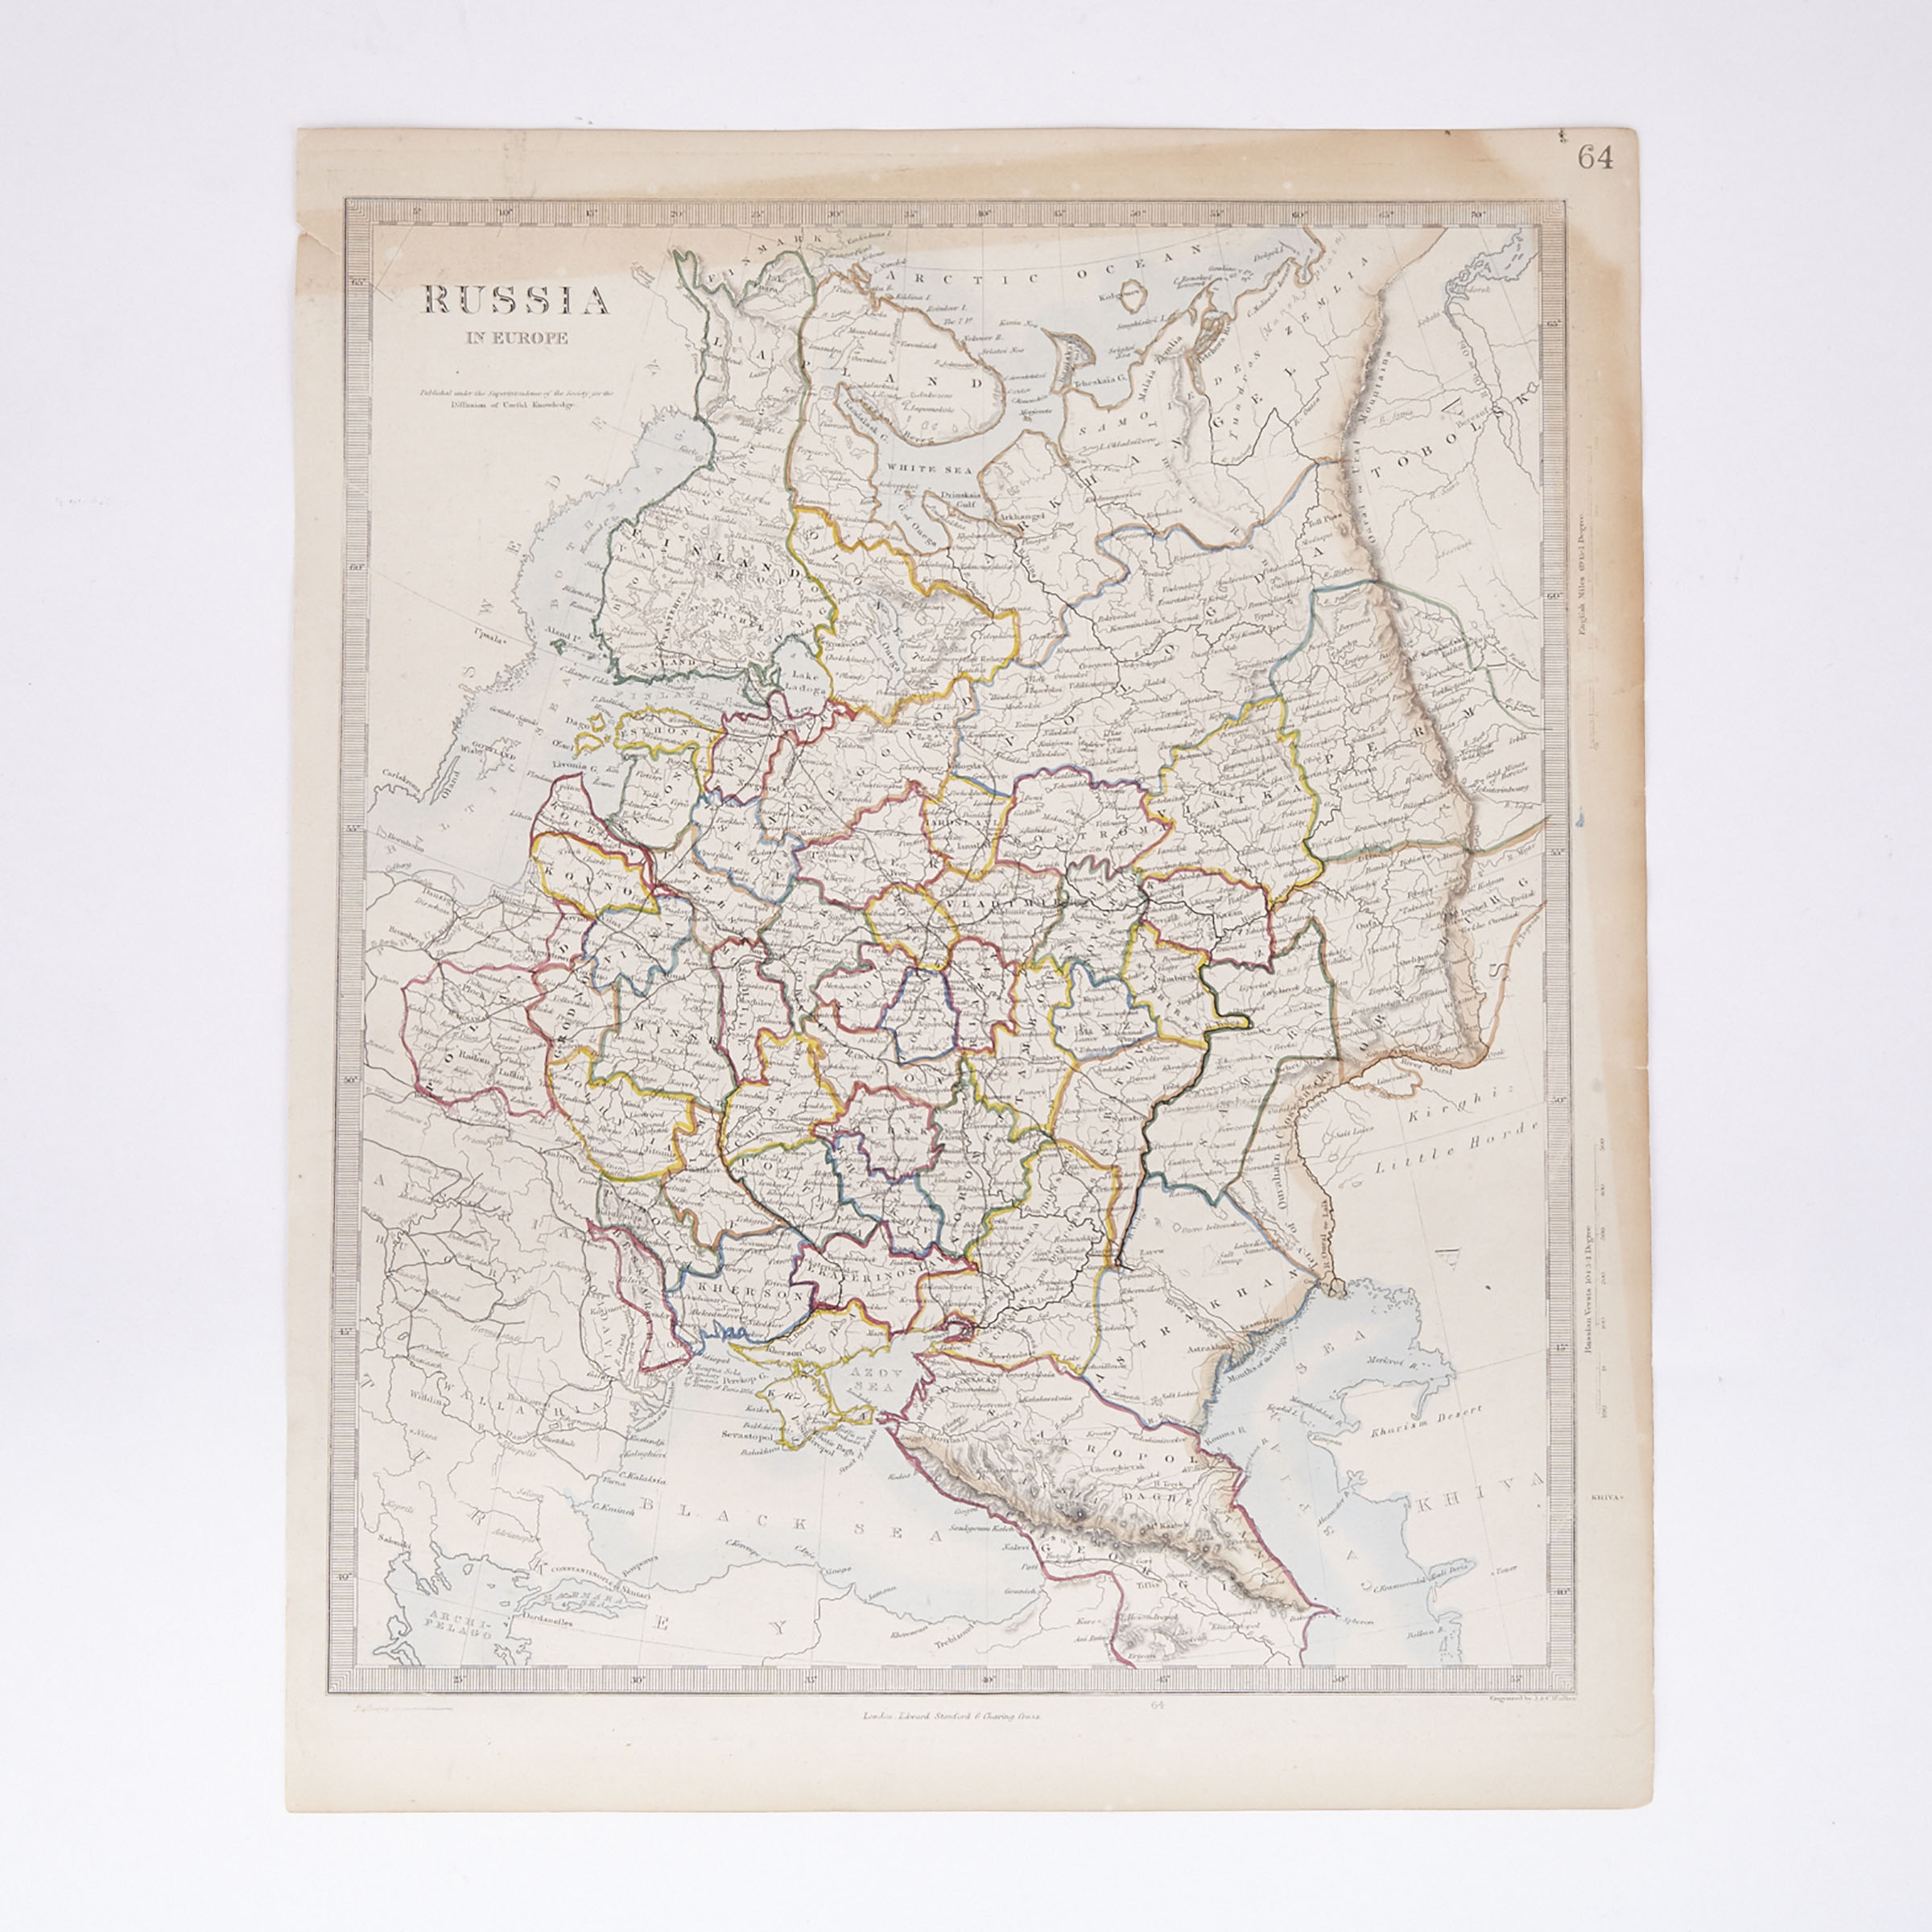 Five Maps of Europe, Siberia and Russia, 19th century